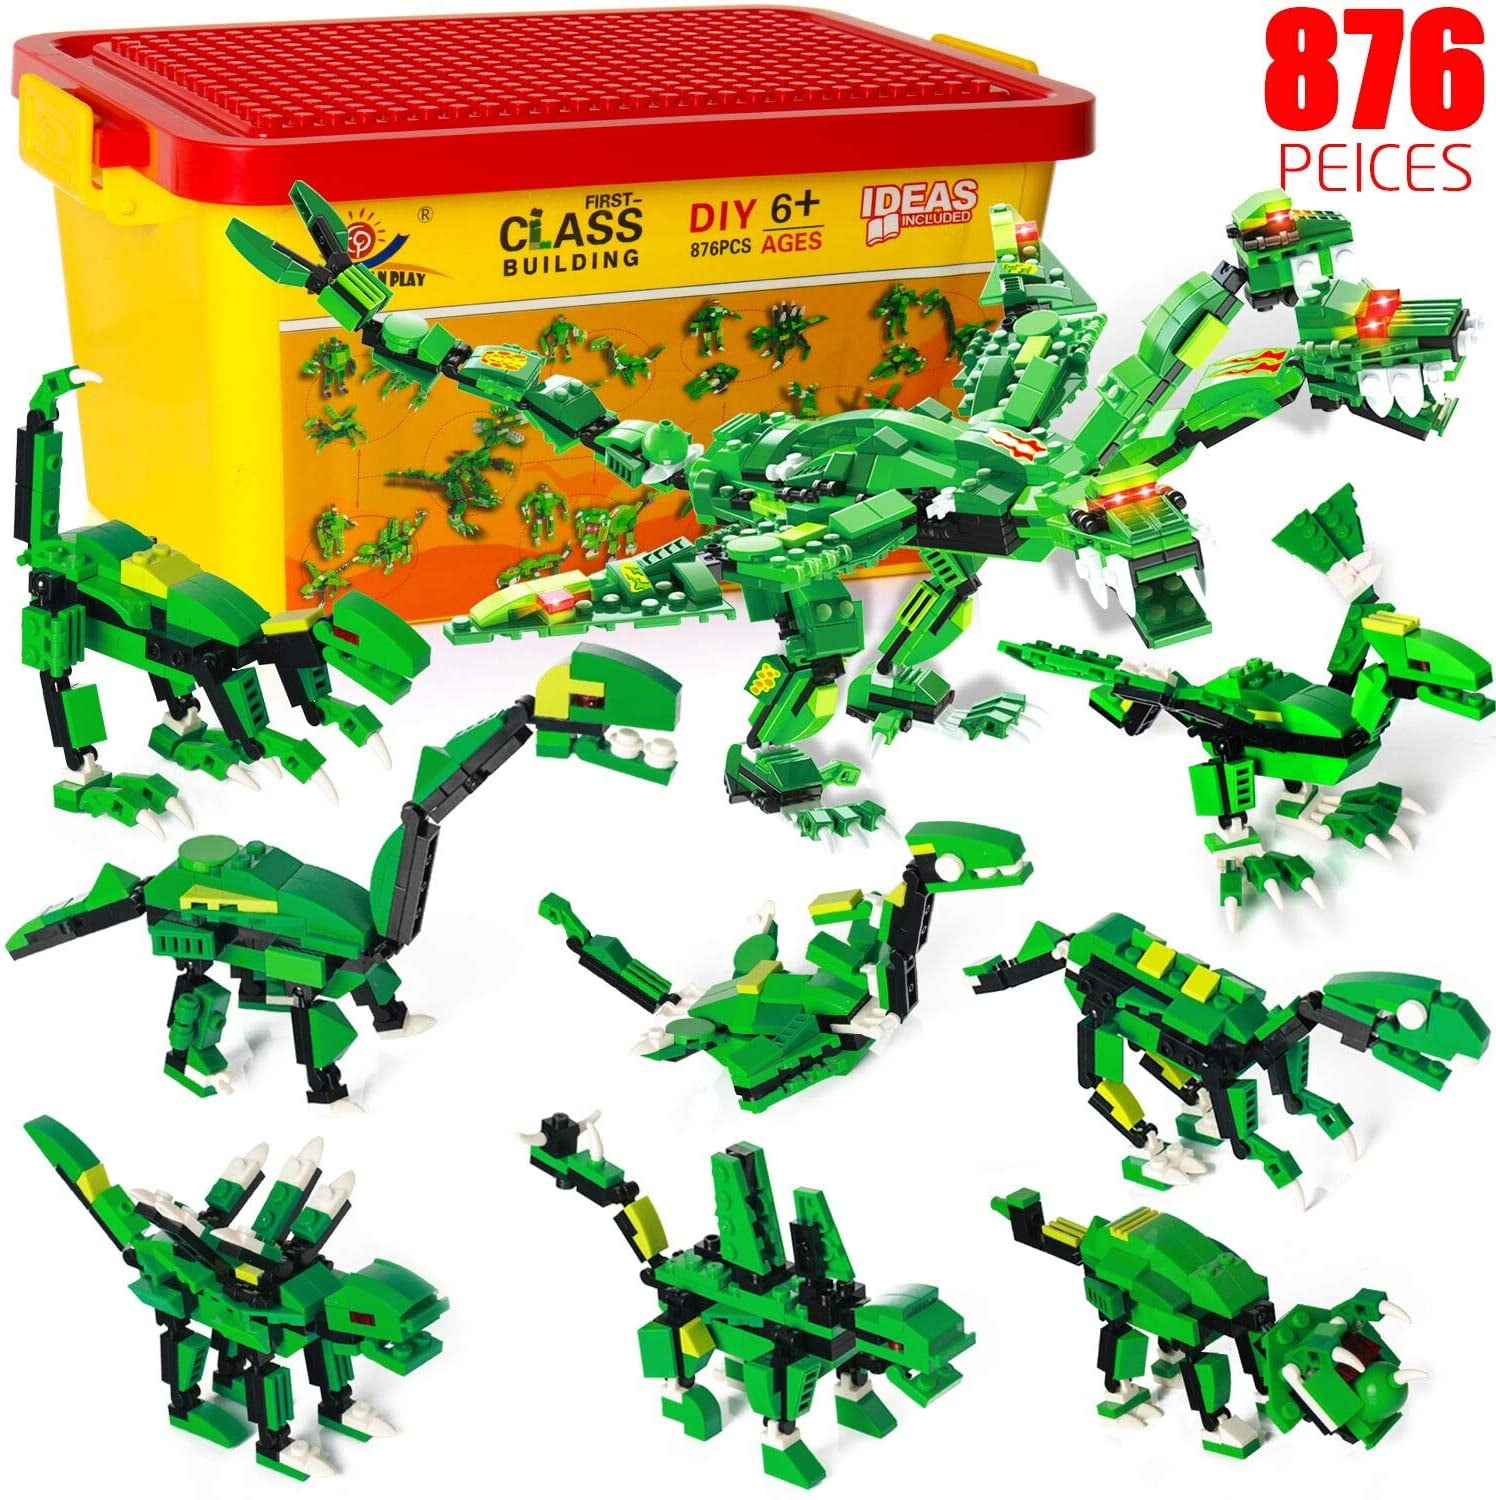 burgkidz Dinosaurs Building Blocks Suitcase Kids STEM ON The GO Sets for Creative DIY Construction Toy for Boys Girls Ages 5 6 7 8 9 Years Old Build 14 Dinosaurs In One Time 1415 Pcs Building Bricks 